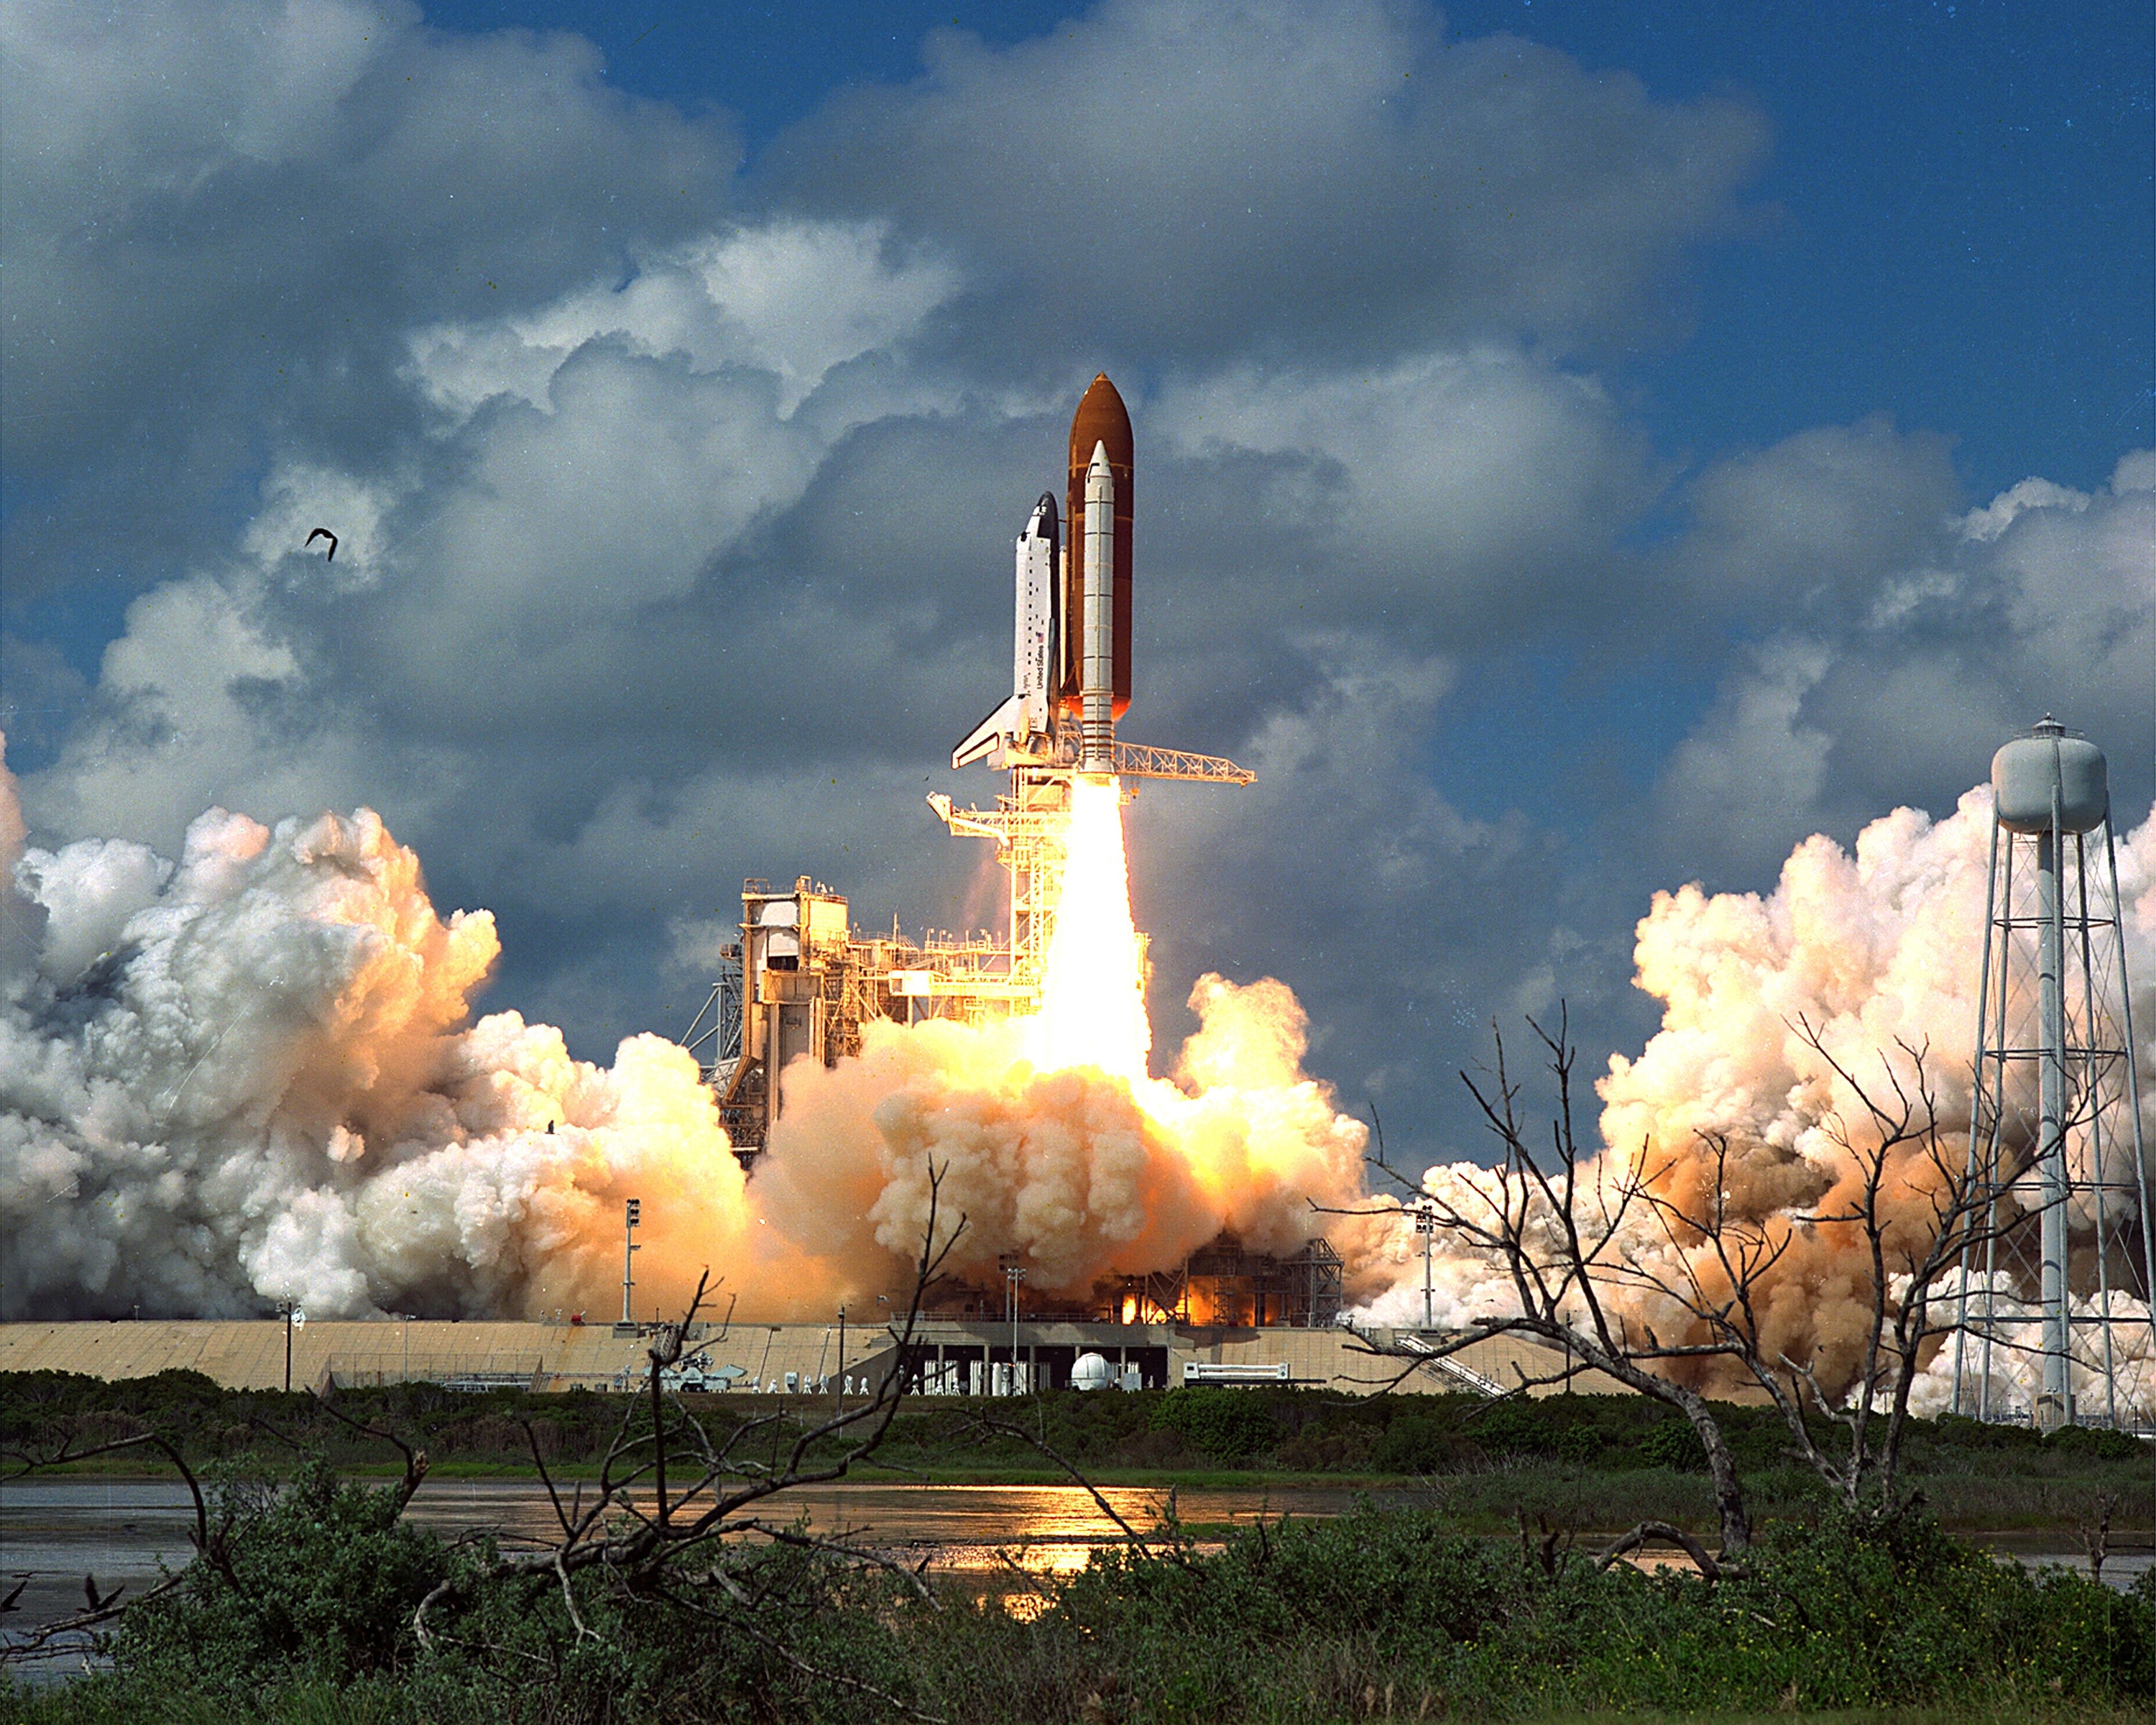 Mission, Launch, Discovery Space Shuttle, smoke - physical structure, space exploration